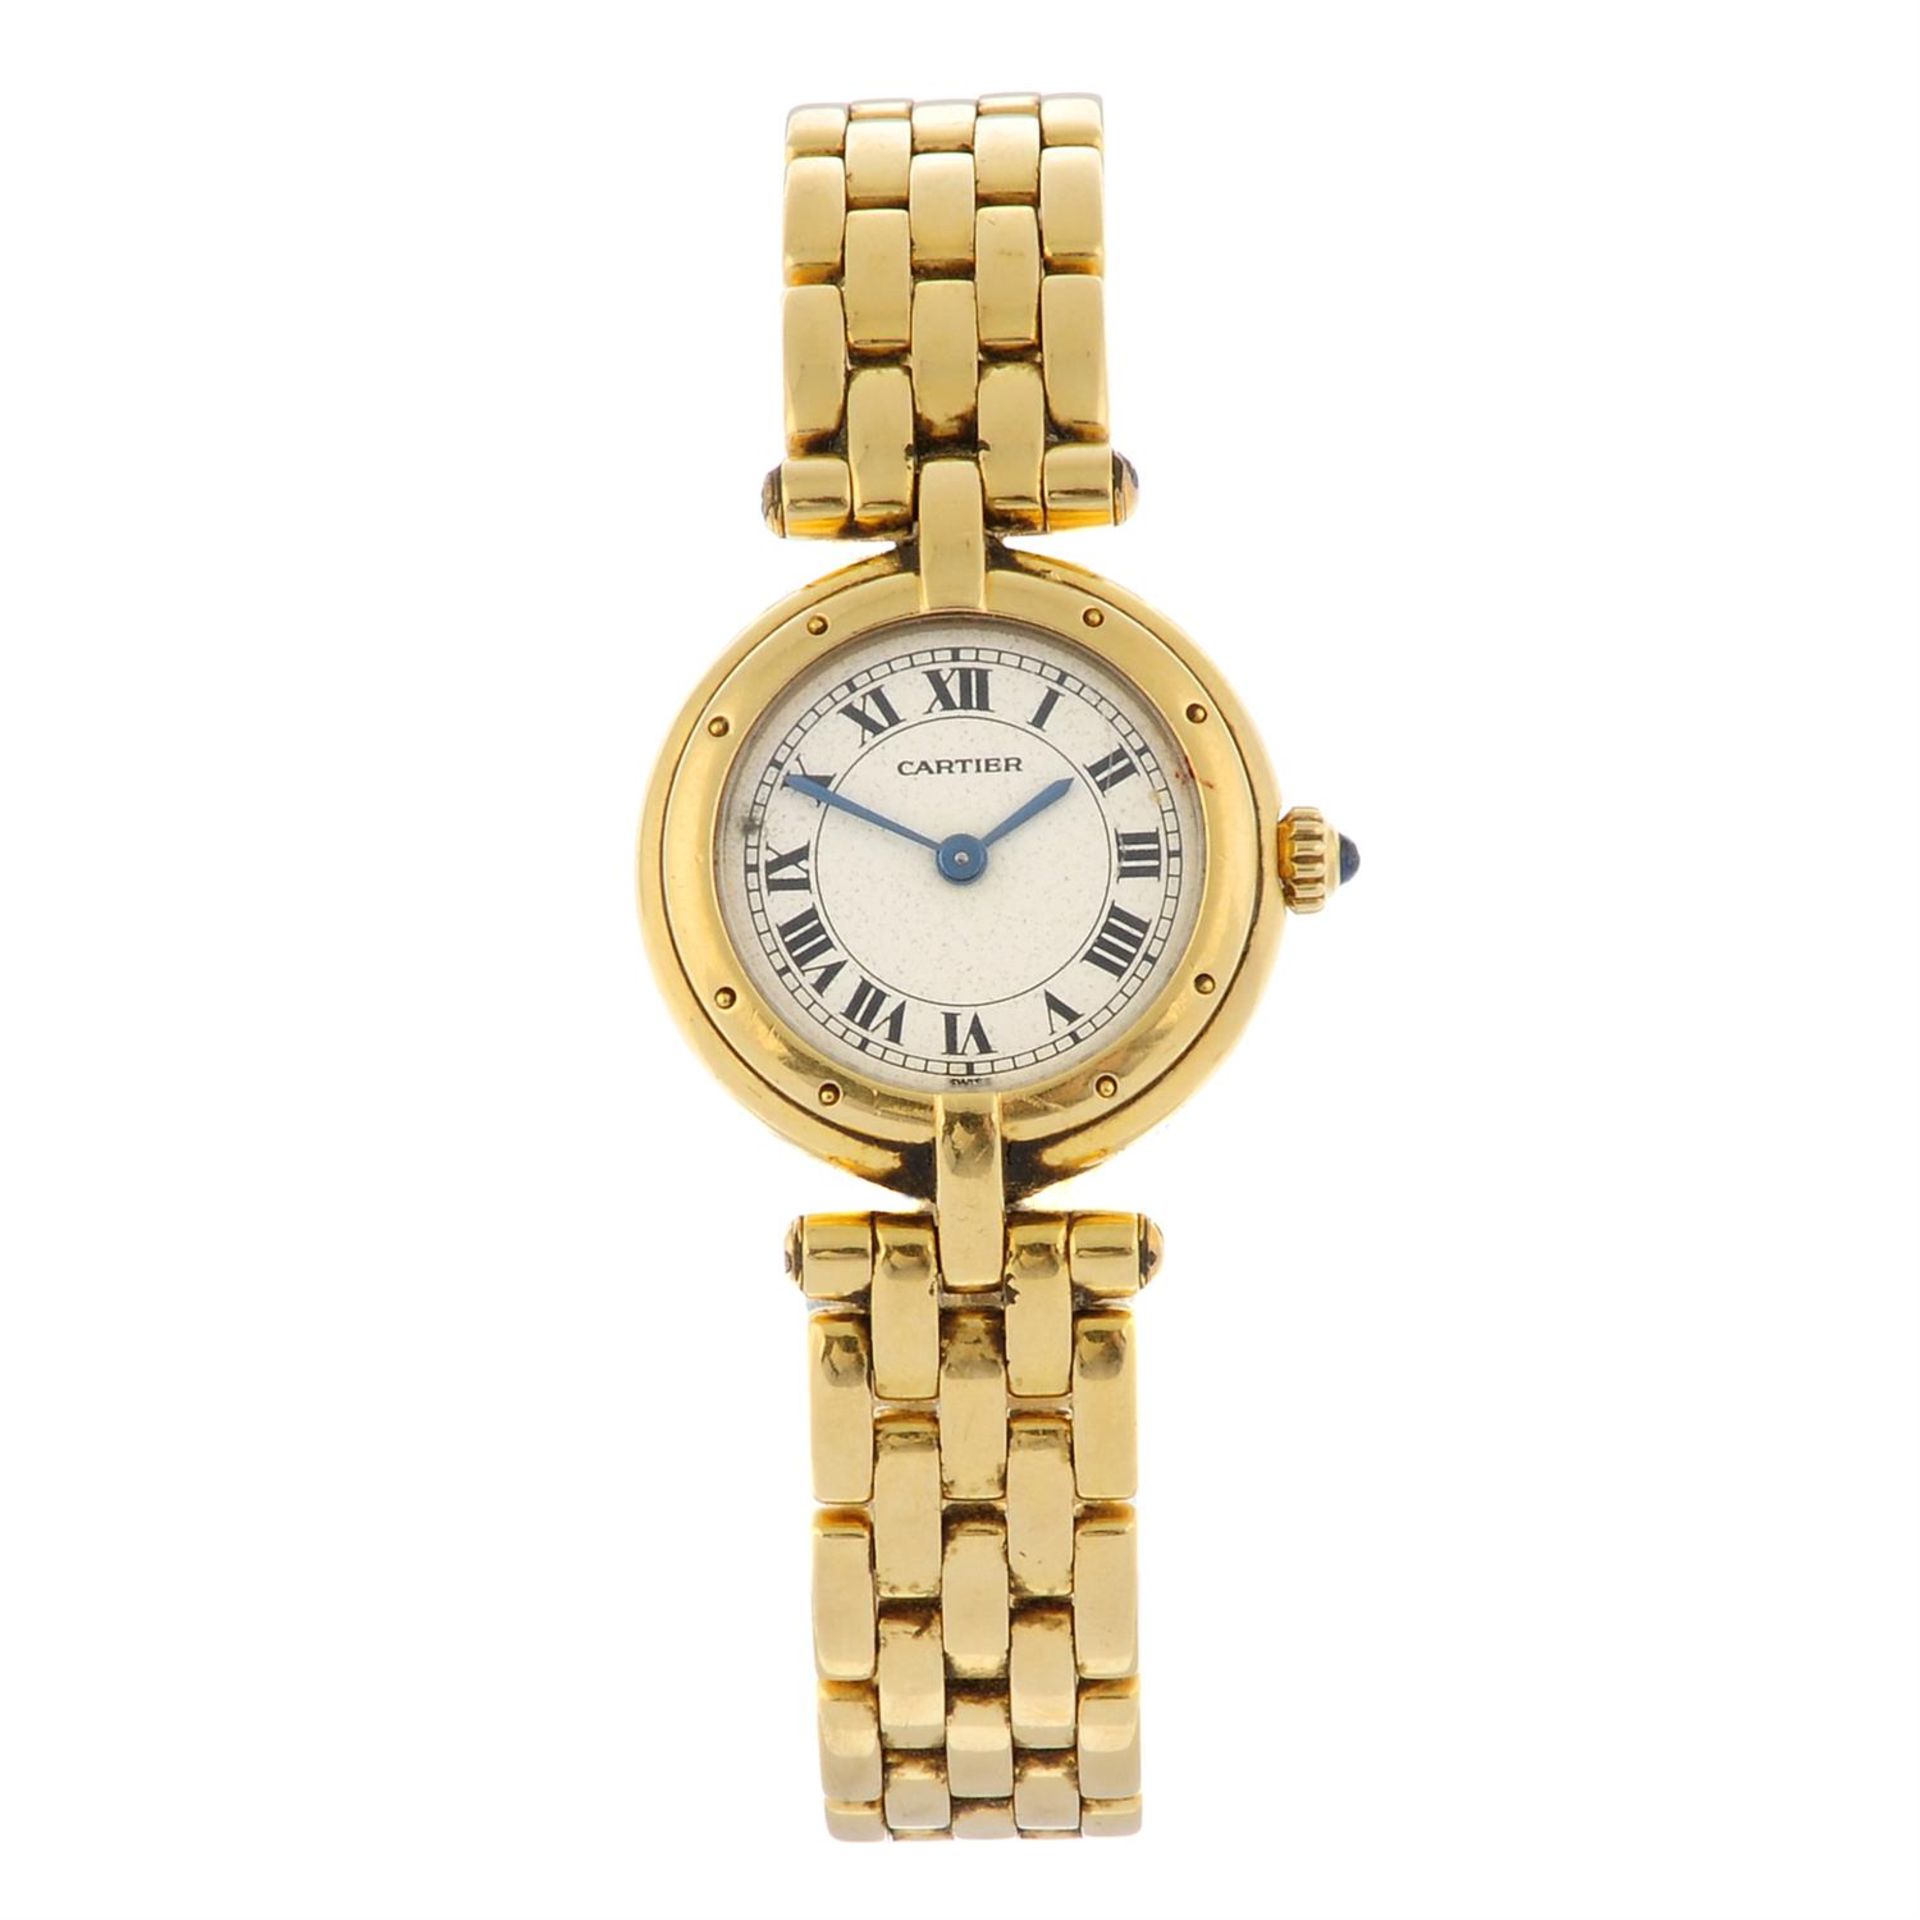 CARTIER - an 18ct yellow gold Panthere Vendome bracelet watch, 23.5mm.